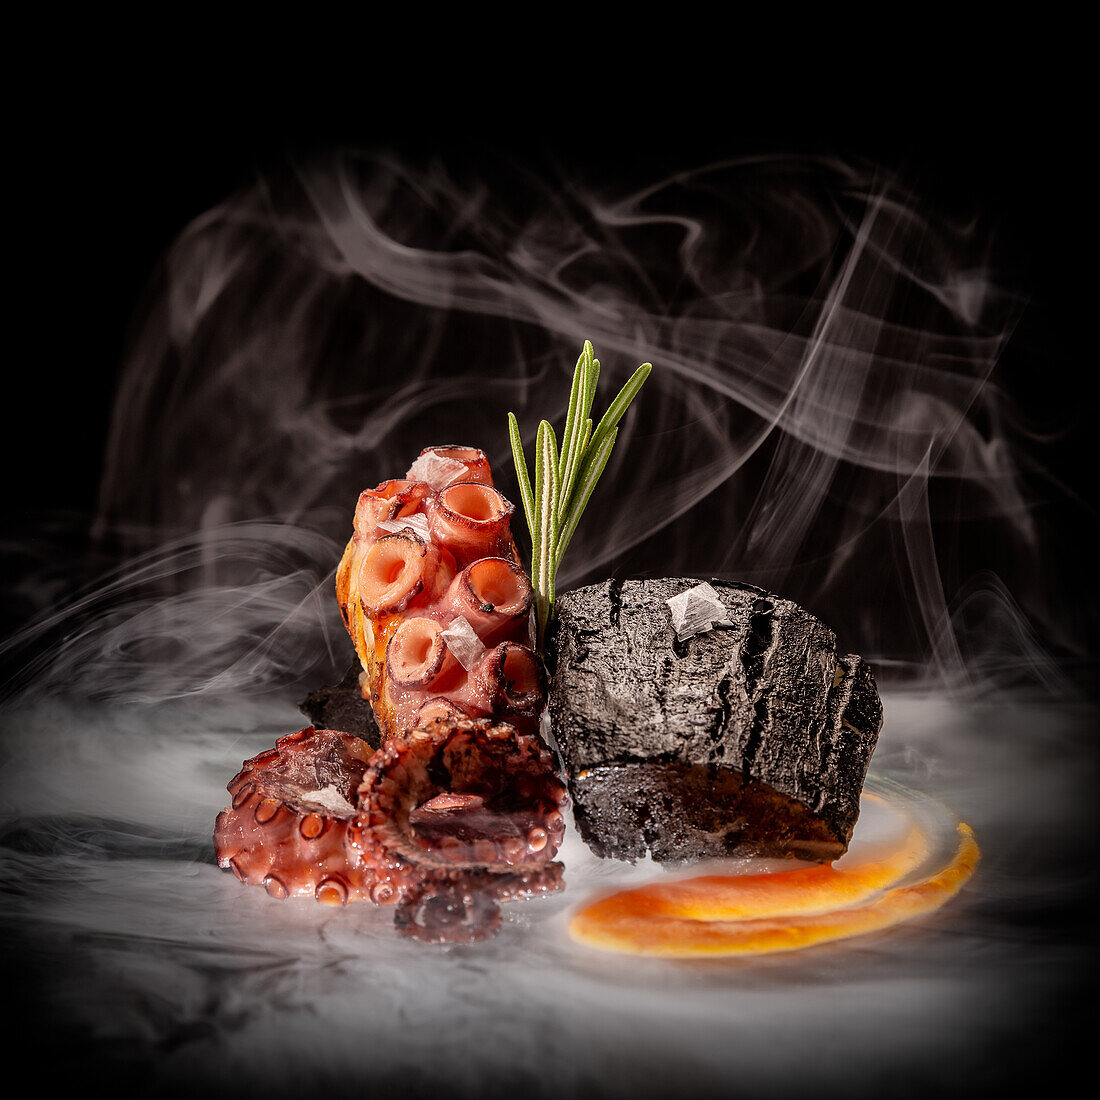 Appetizing octopus tentacles with green rosemary sprig and sauce placed near piece of wood on black surface in smoke